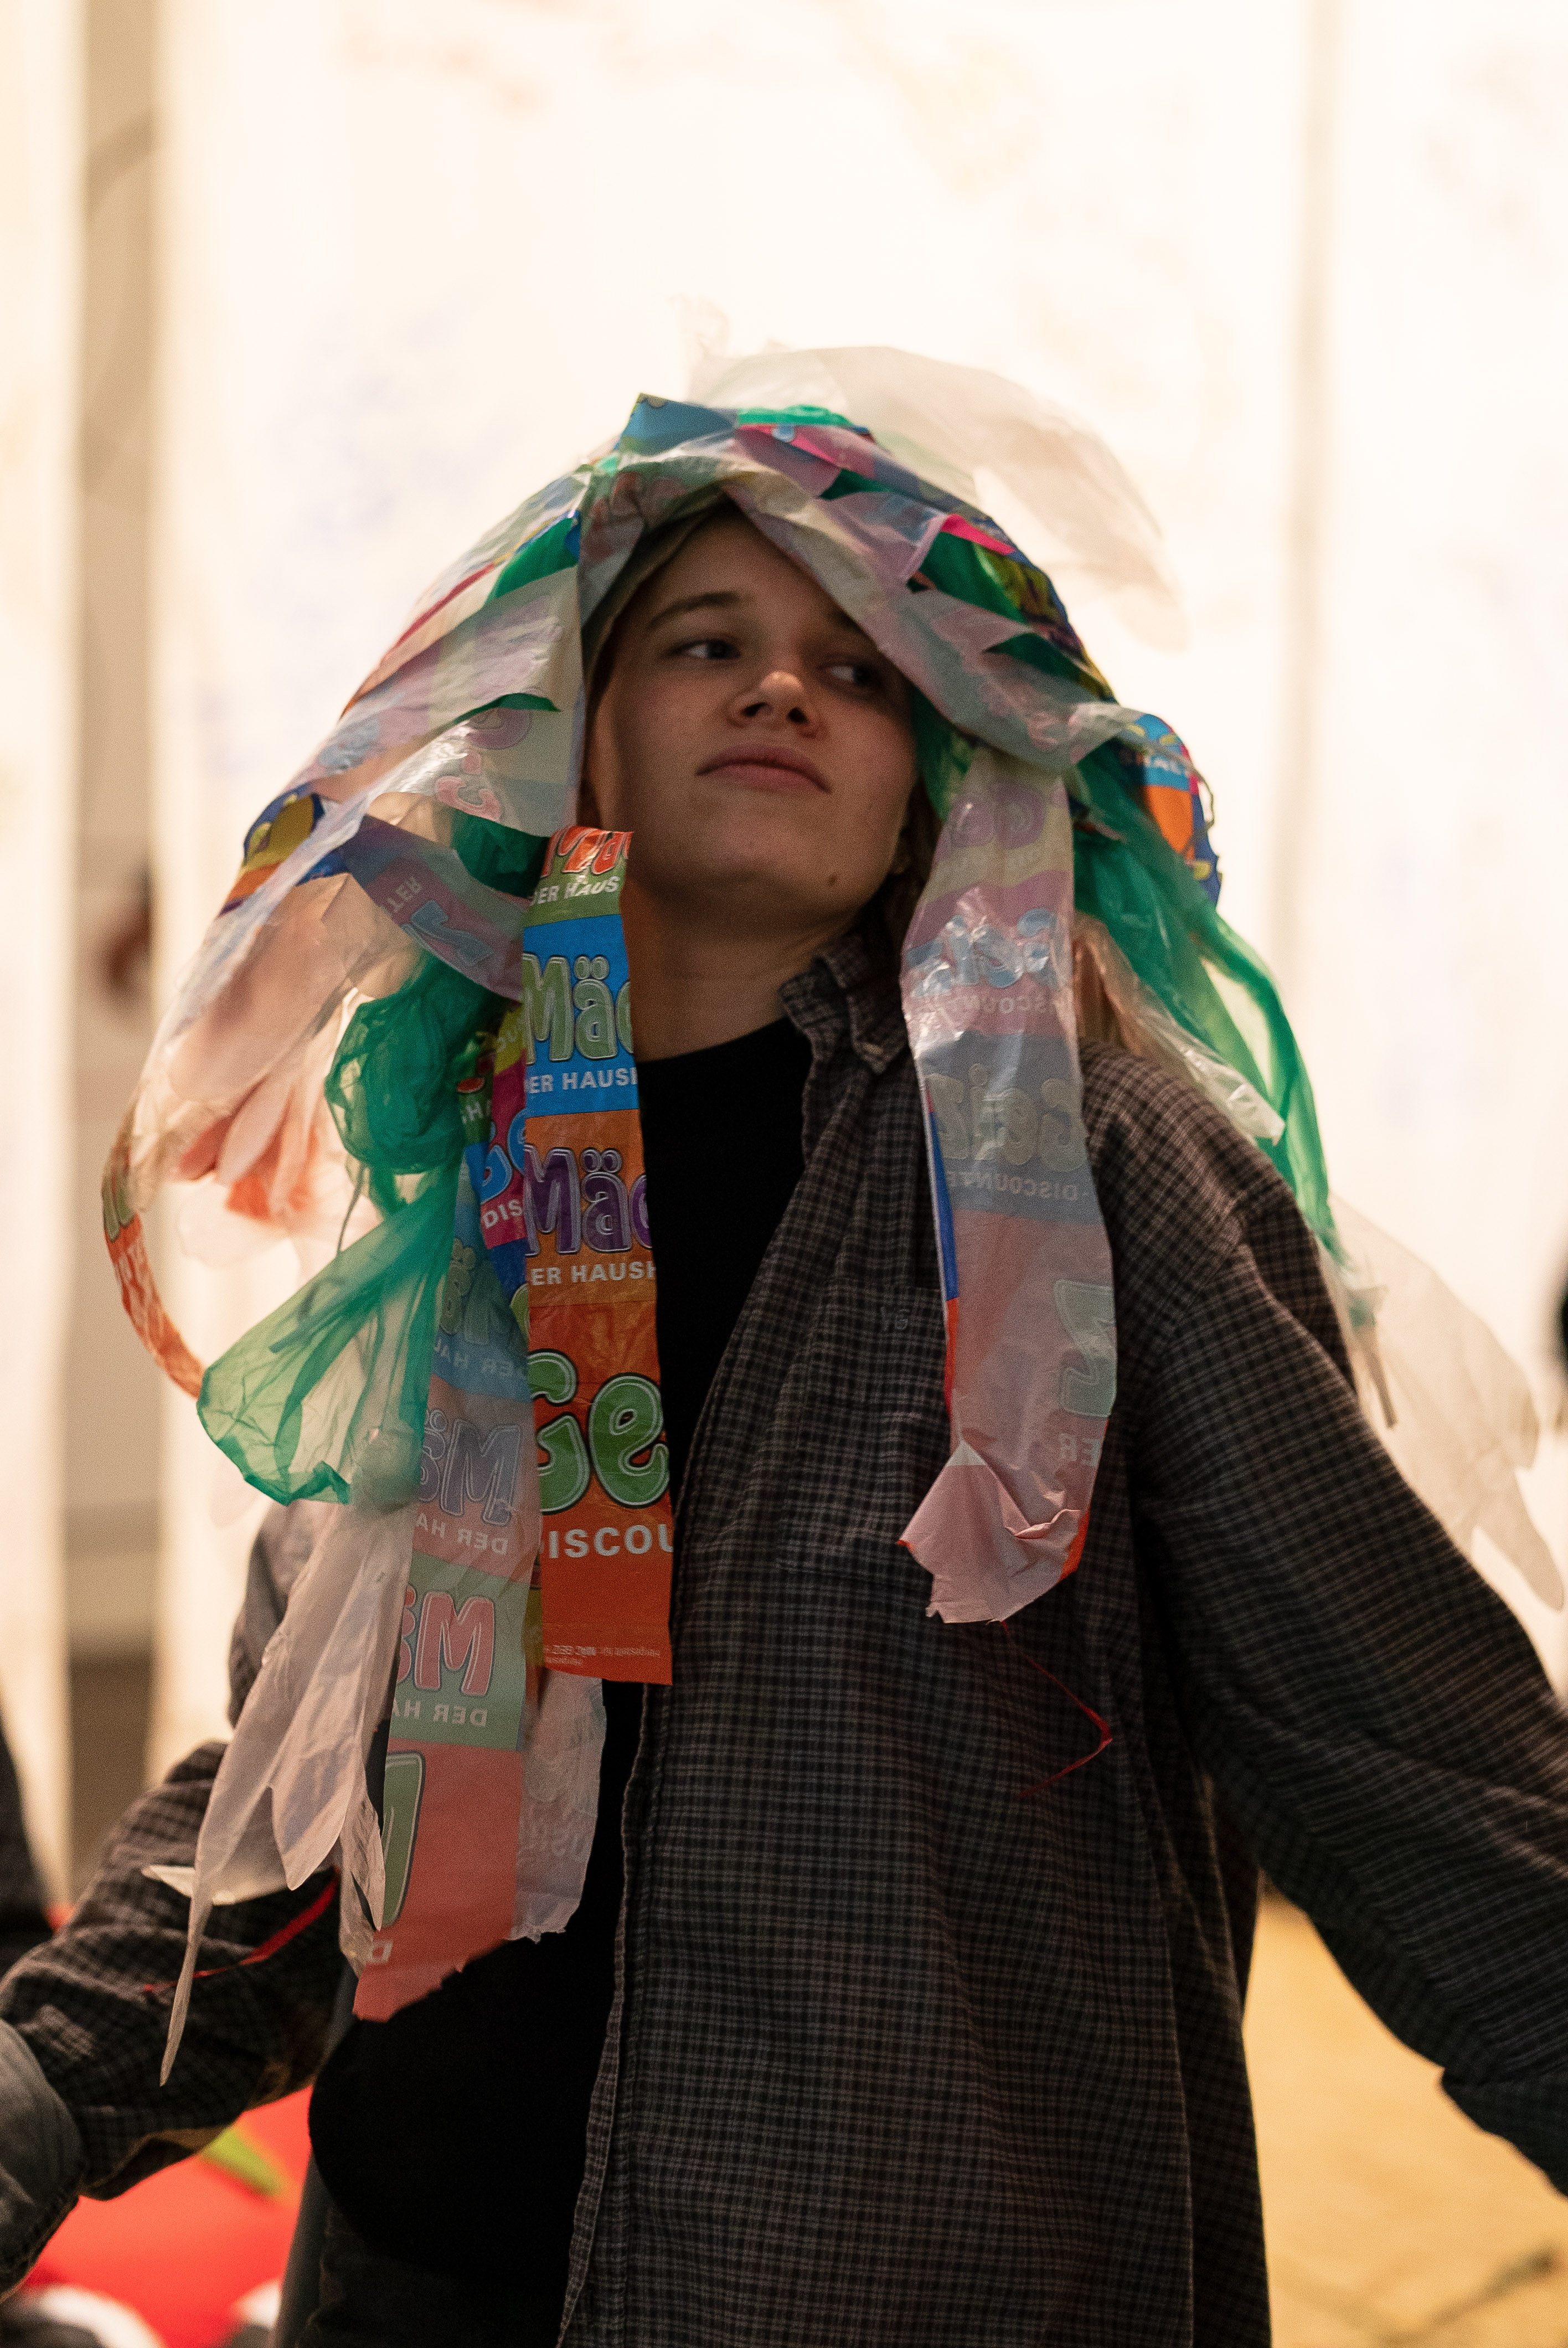 The photo is a medium shot of a person wearing a checked shirt in a dancing position. On the head they wear a colorful headpiece made out of trash bags.